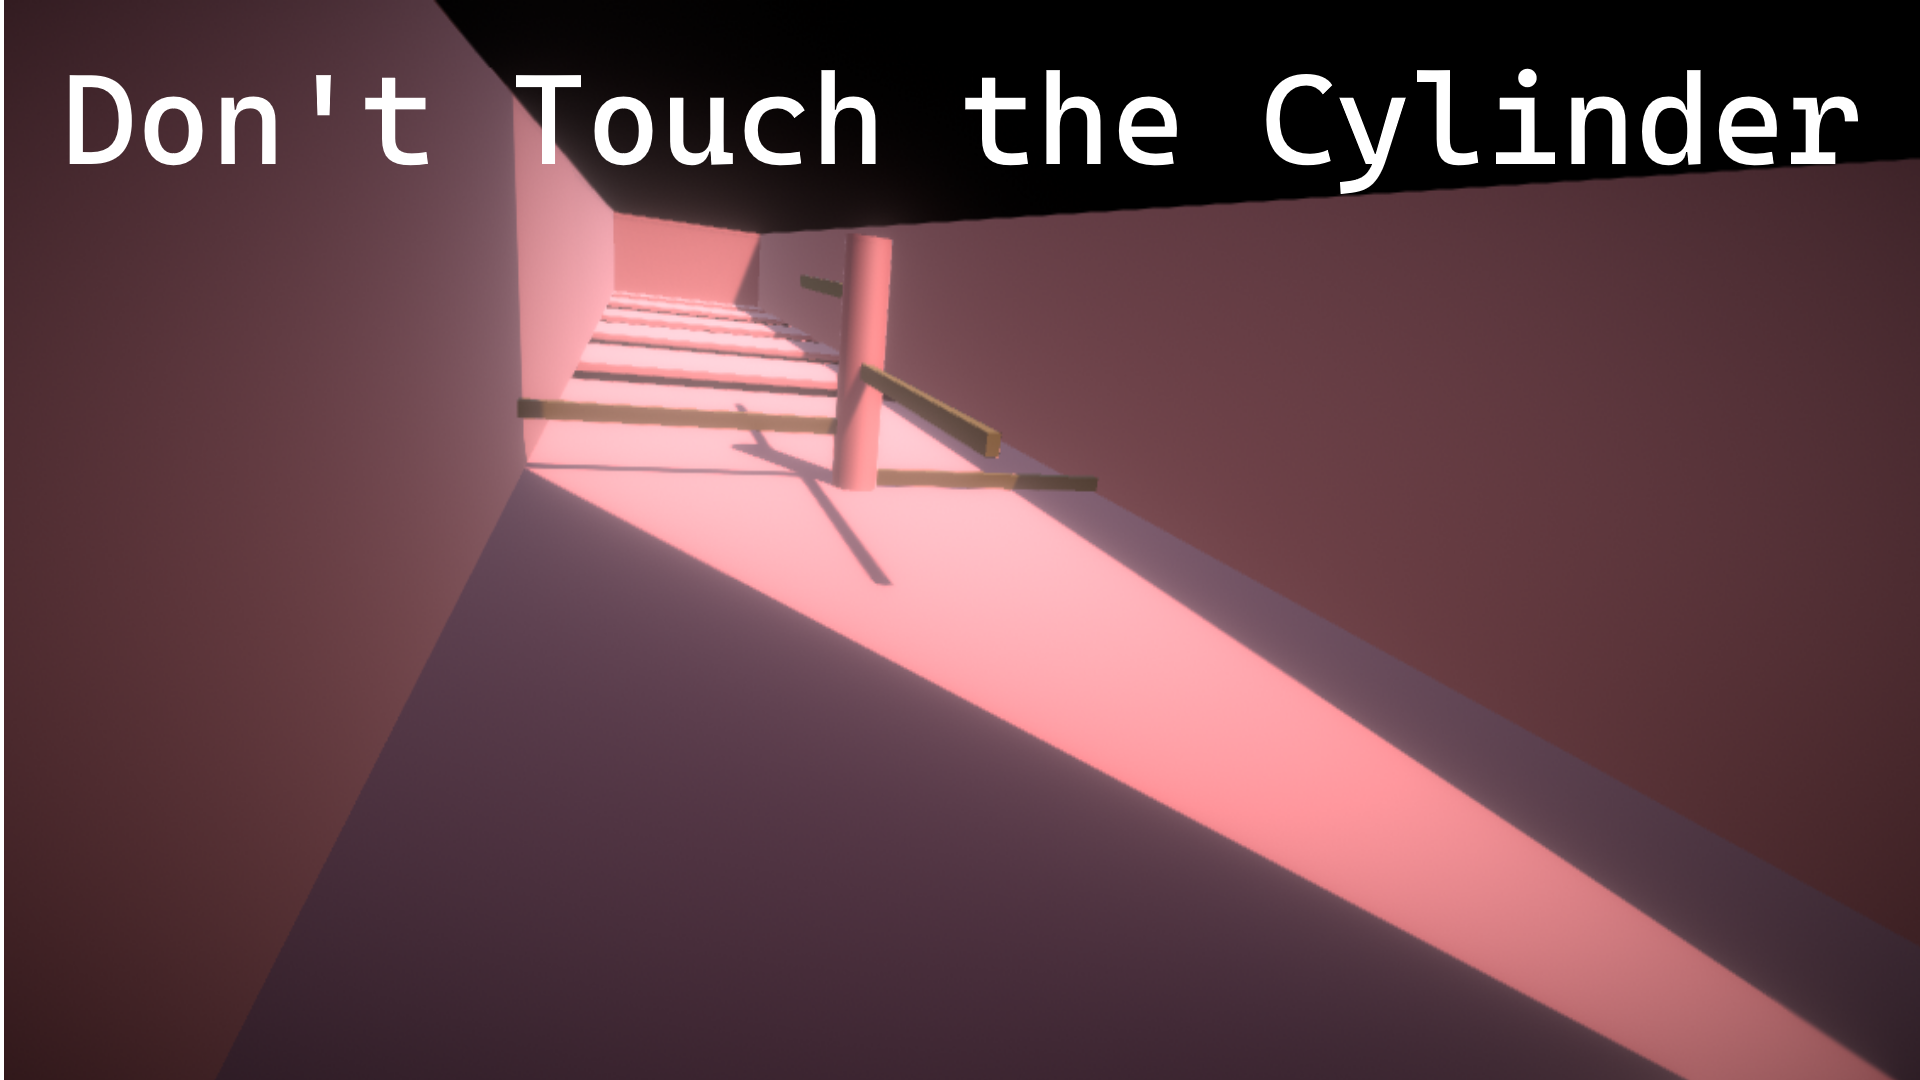 Don't touch the Cylinder